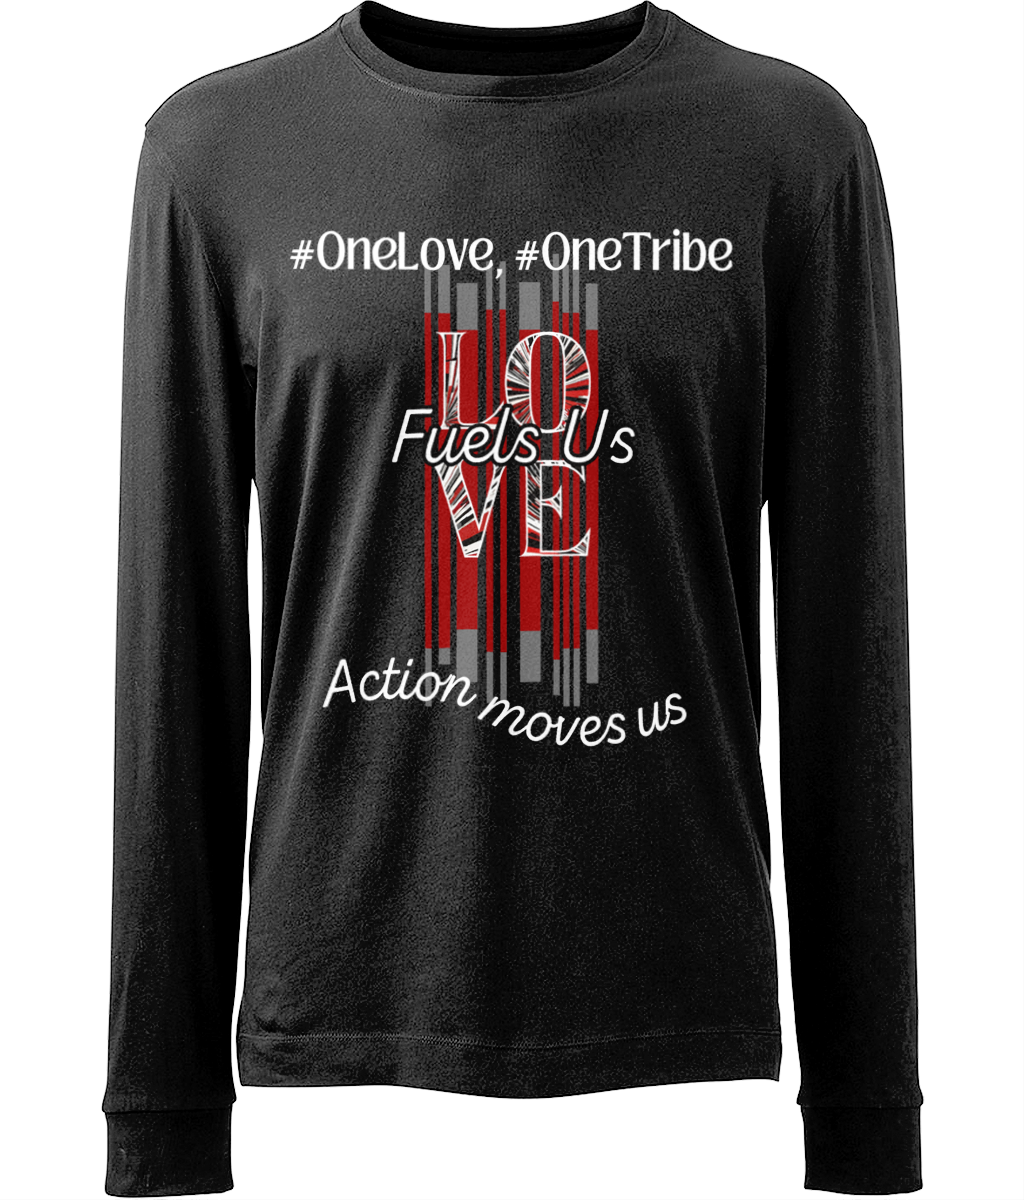 Eco-Friendly Unisex Long Sleeve T-Shirt "#OneLove,#OneTribe-LOVE-Fuels us, Action moves us"